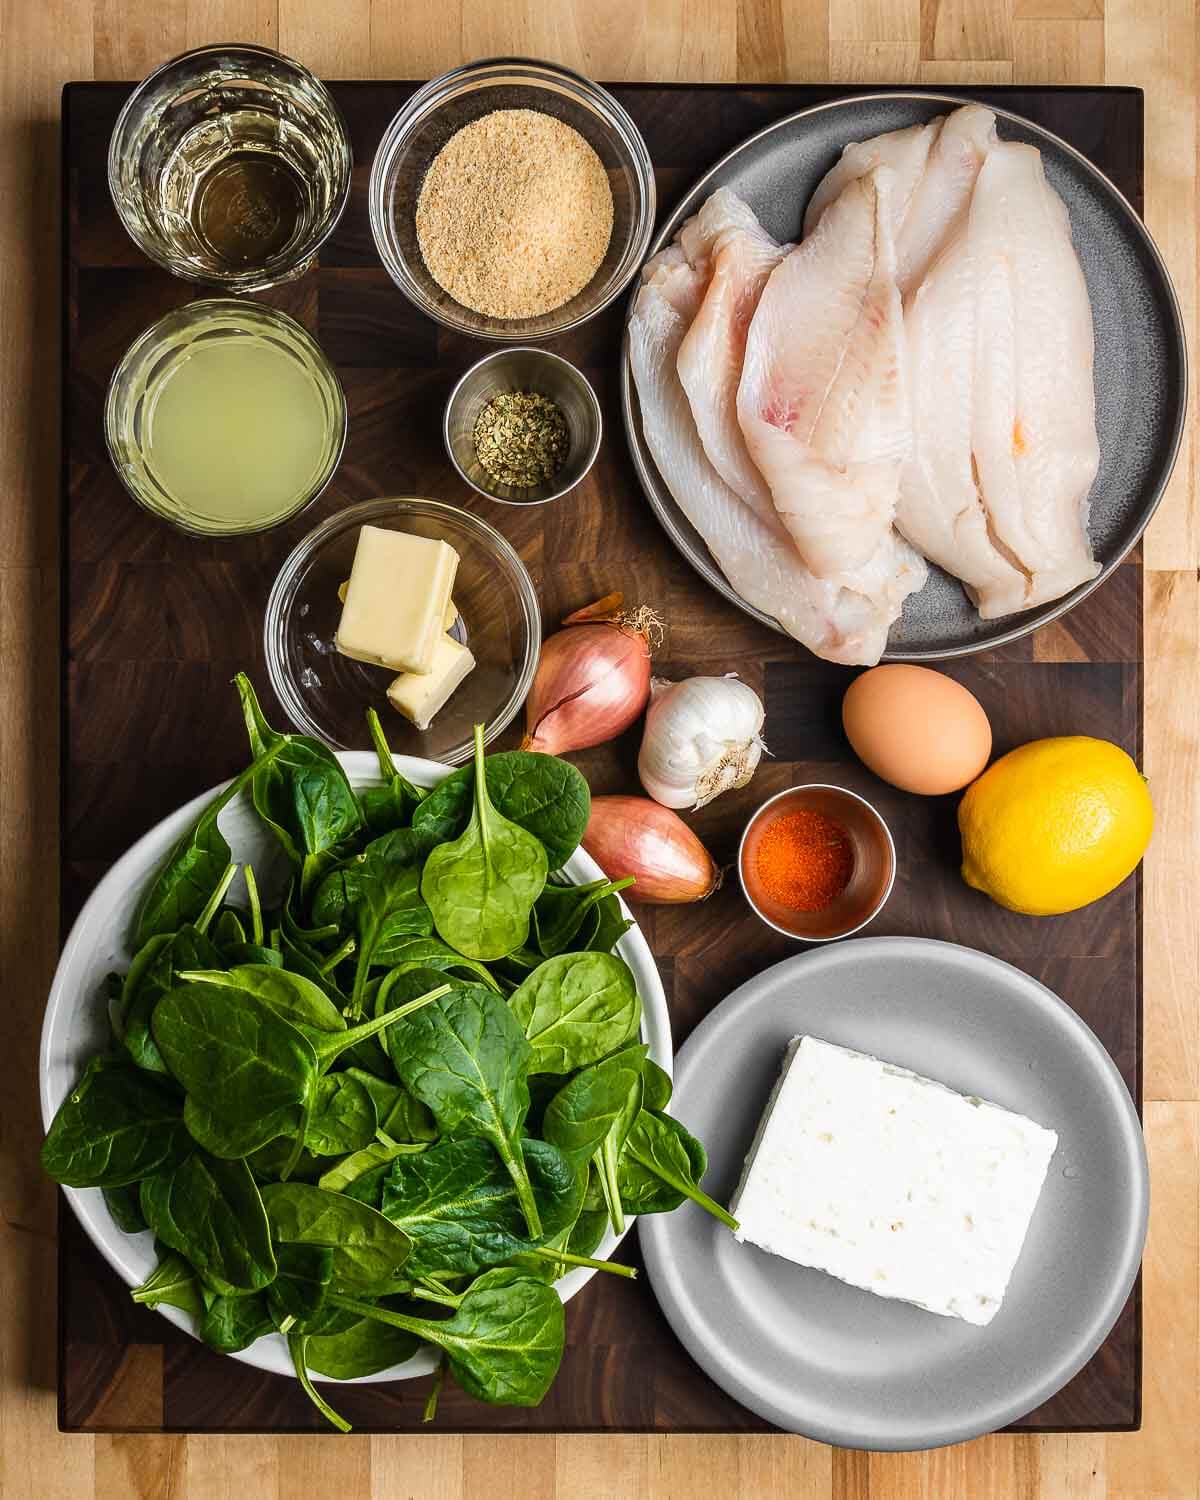 Ingredients shown: white wine, chicken stock, breadcrumbs, oregano, flounder, butter, shallots, garlic, paprika, egg, lemon, baby spinach, and feta cheese.